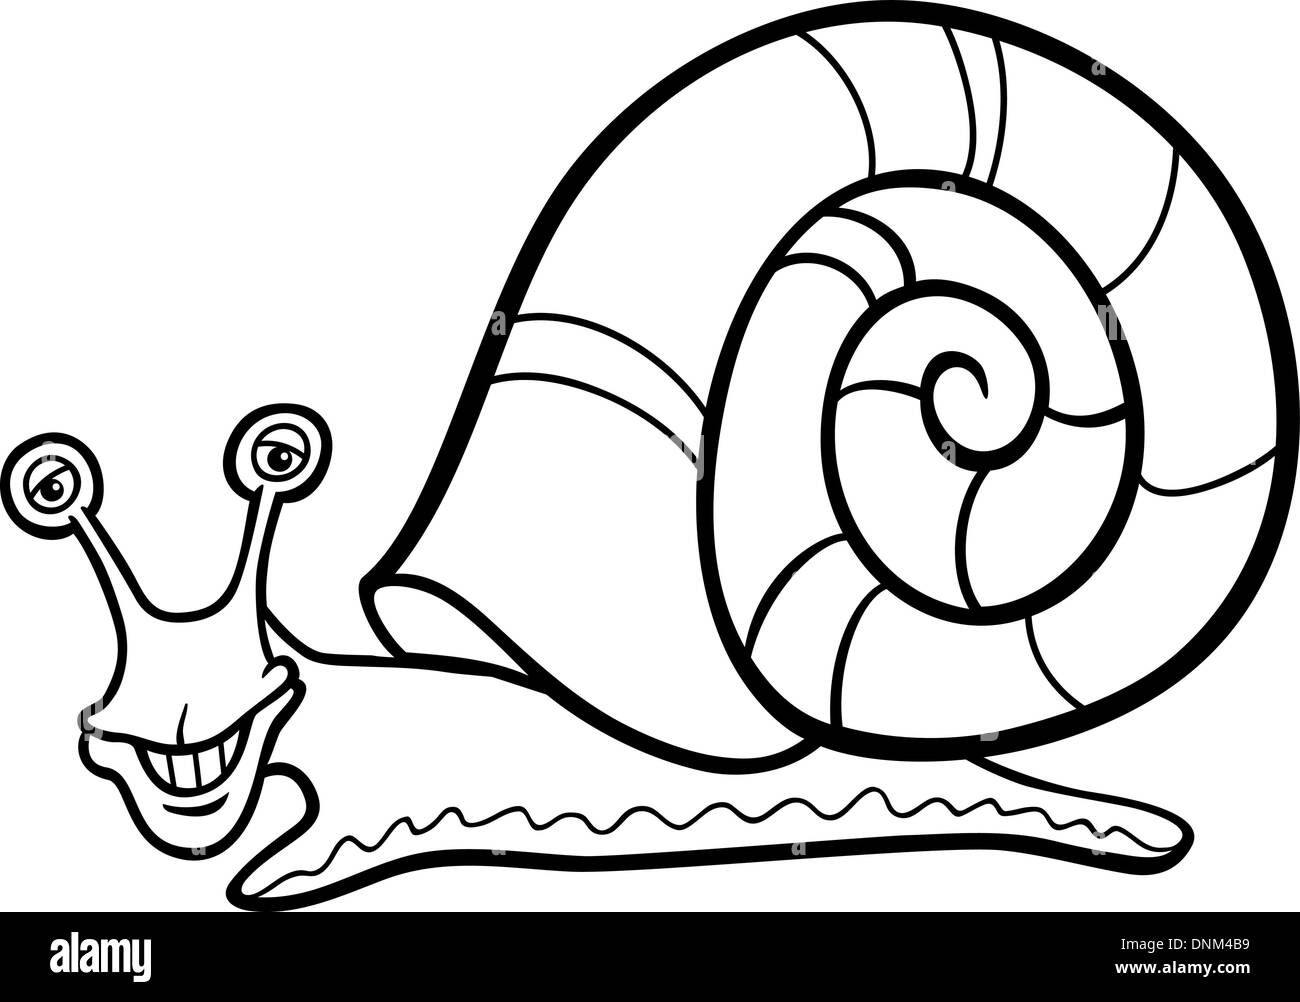 Black and white cartoon illustration of funny snail mollusk with shell for coloring book stock vector image art